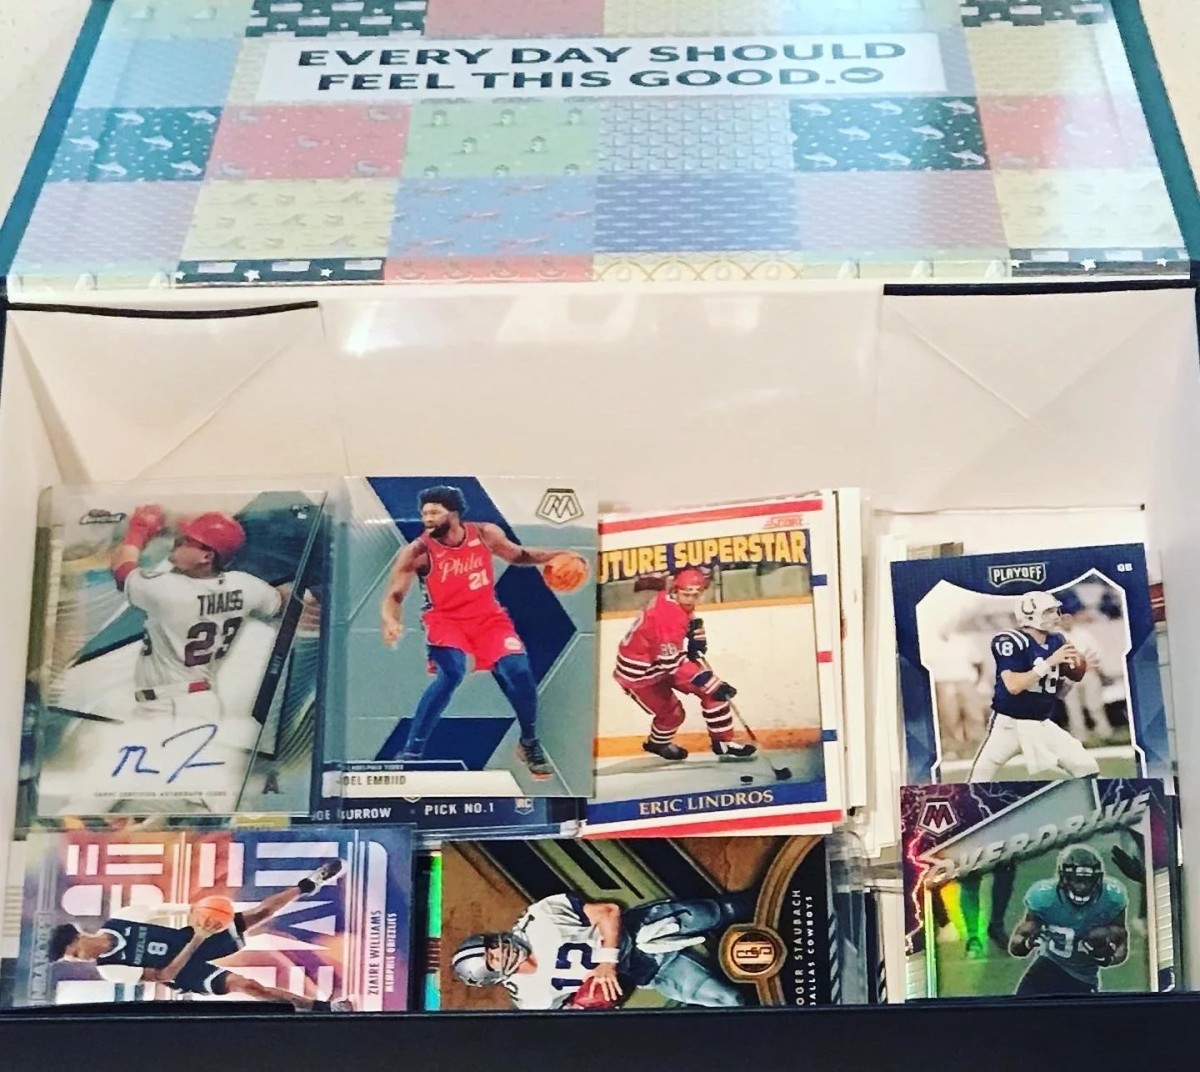 The sports card collection of Laura Fleming and her son.